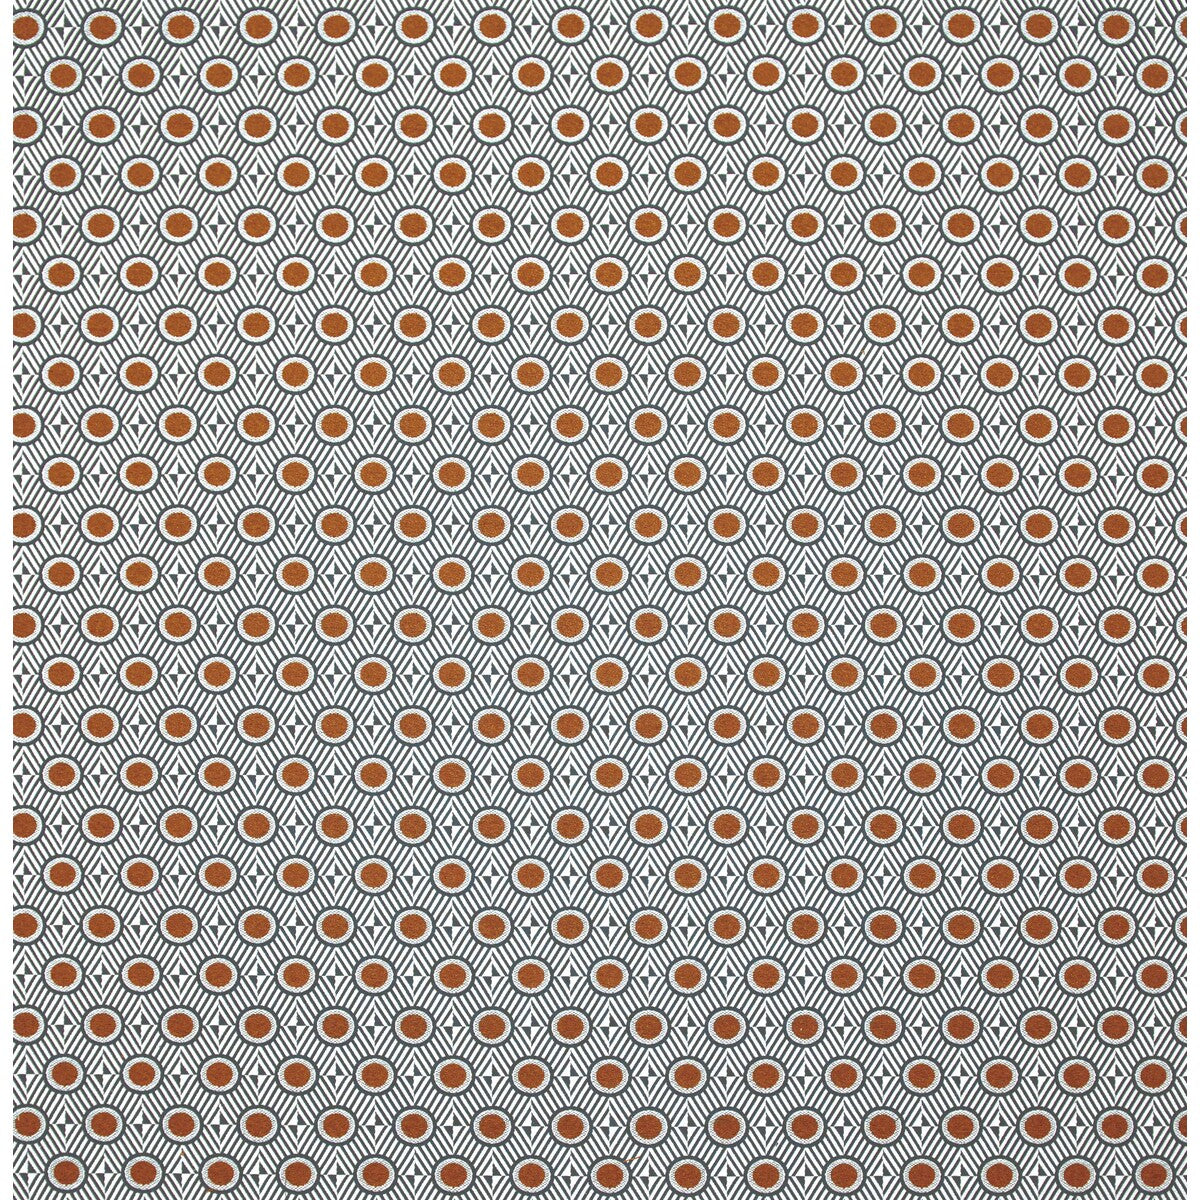 Morley fabric in naranja color - pattern GDT5400.3.0 - by Gaston y Daniela in the Gaston Africalia collection